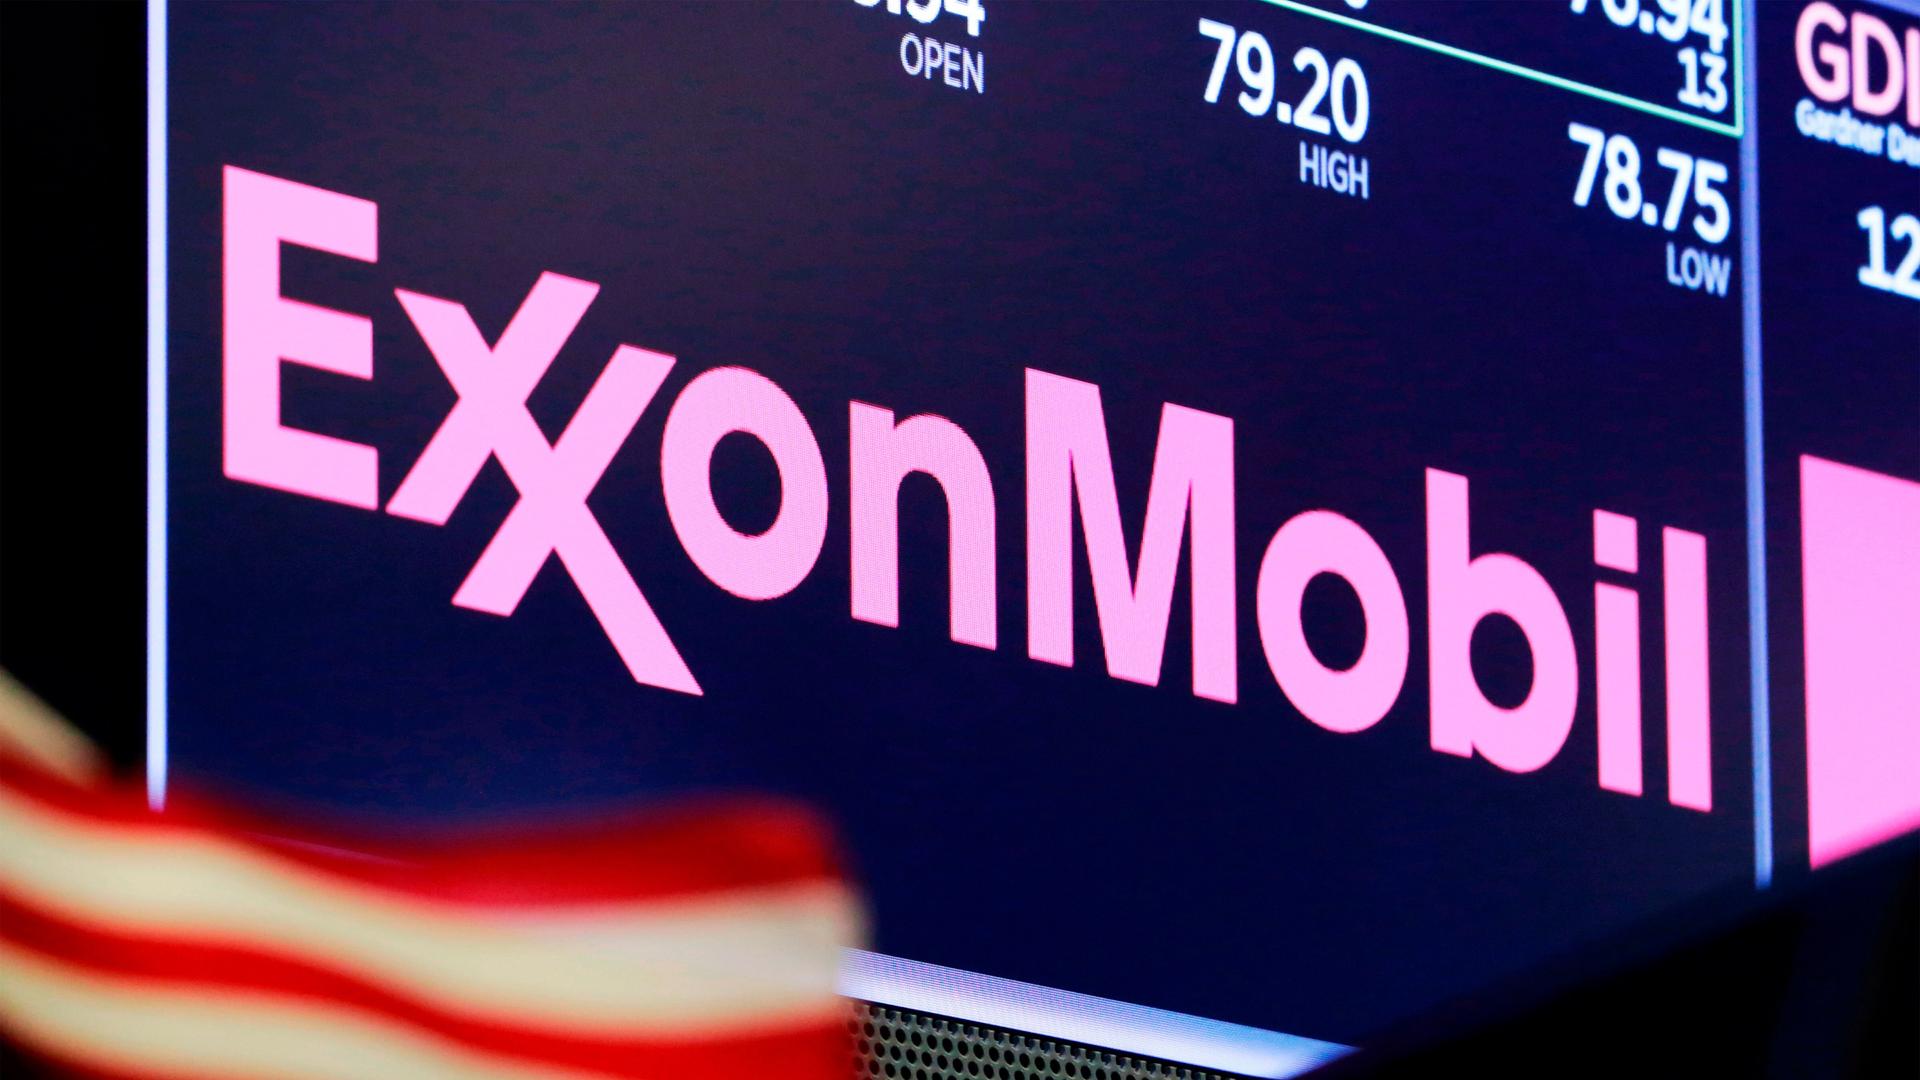 The logo for ExxonMobil appears above a trading post on the floor of the New York Stock Exchange